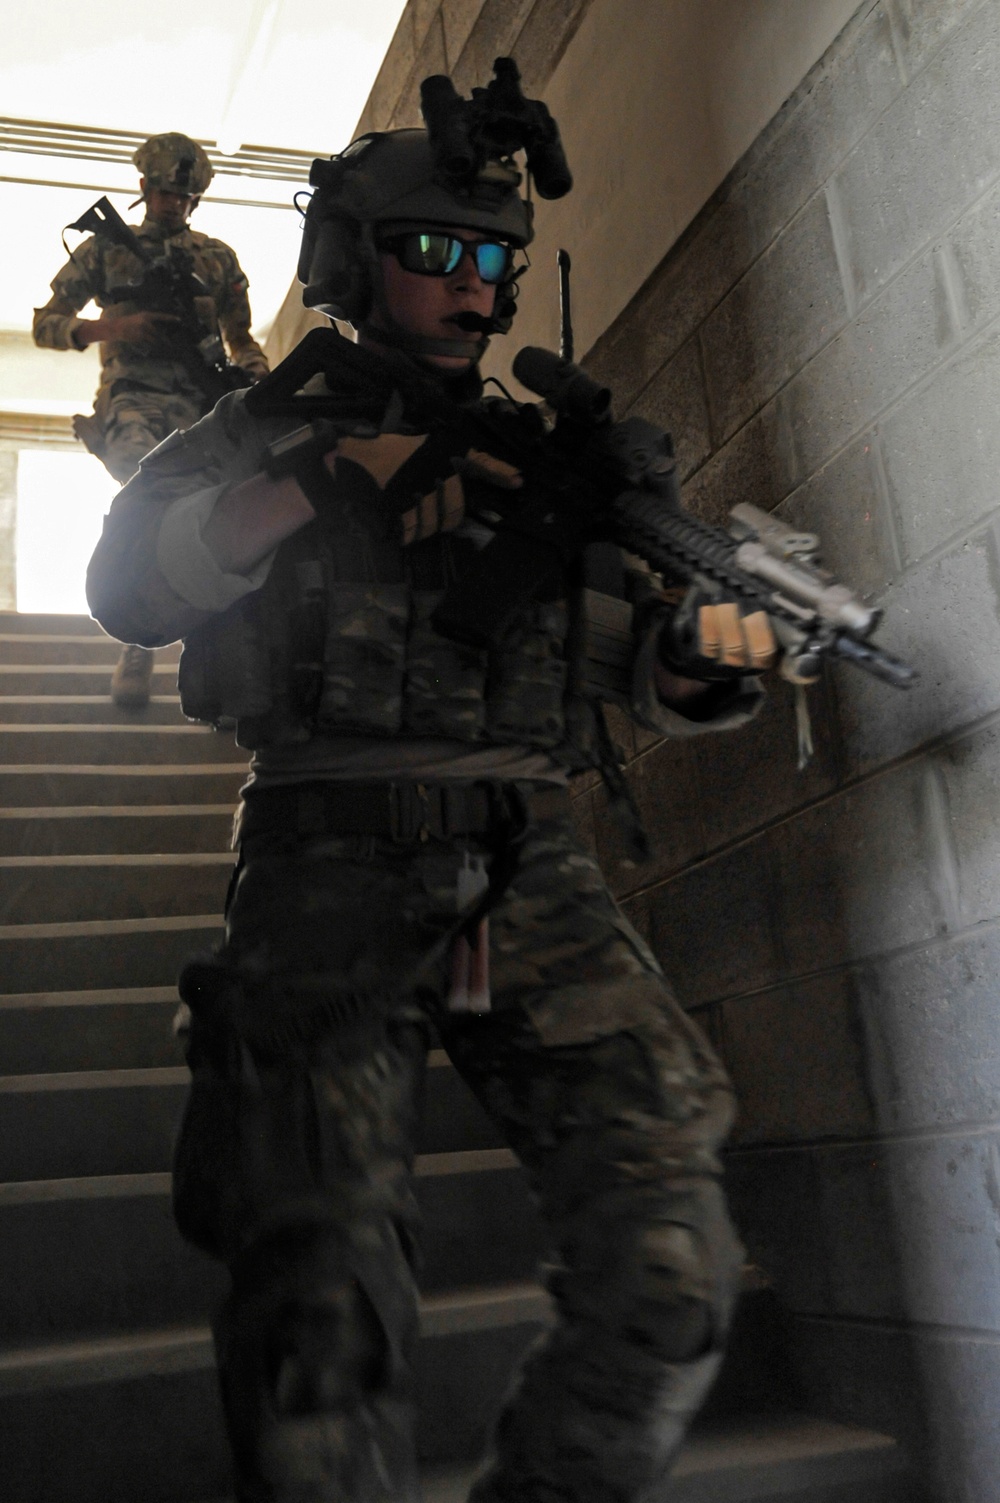 Combat Search and Rescue training